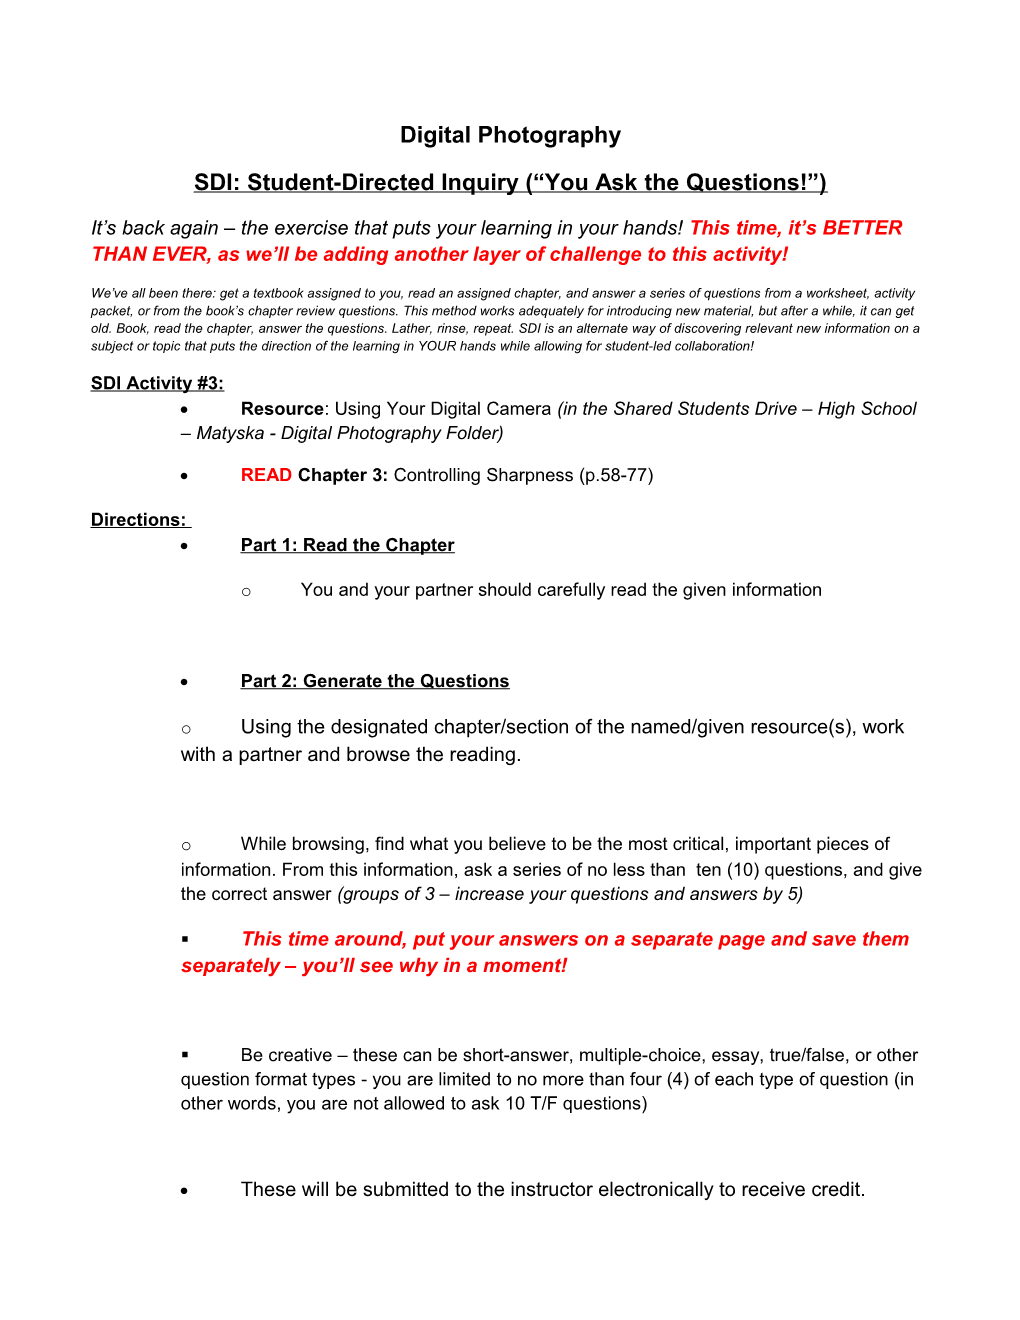 SDI: Student-Directed Inquiry ( You Ask the Questions! )